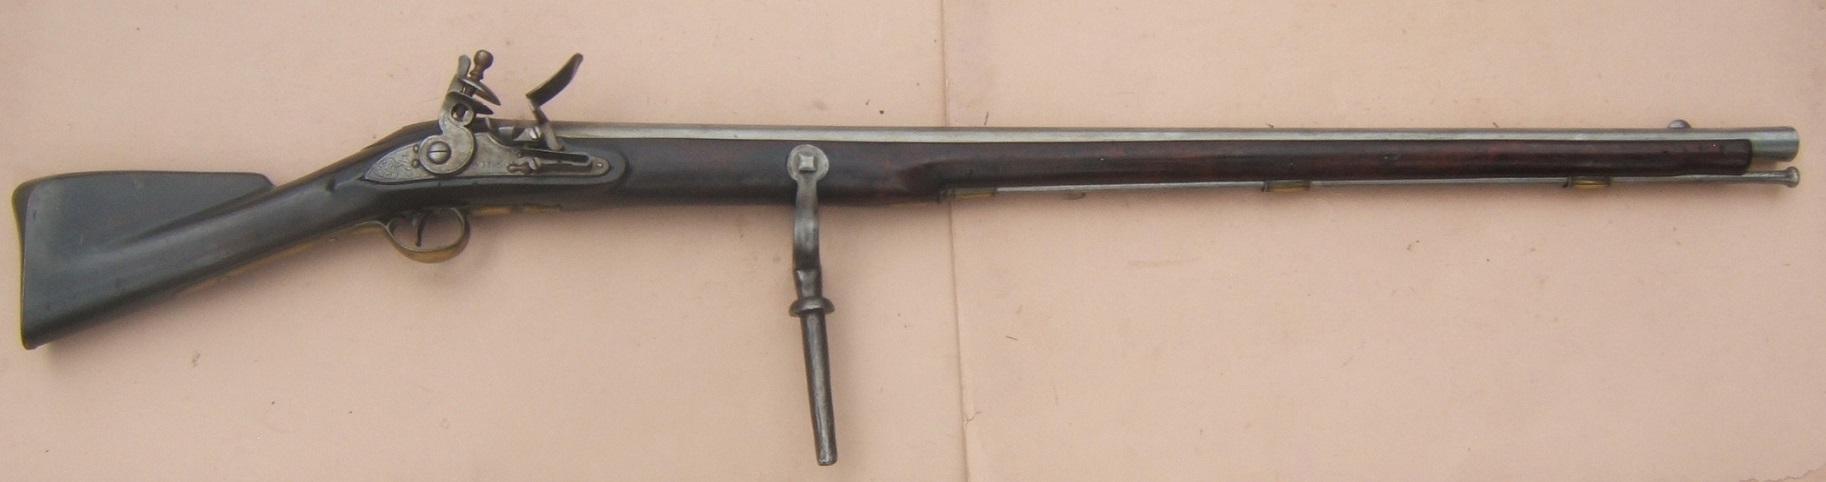 A VERY RARE & EXCELLENT/MUSEUM CONDITION NAPOLEONIC WAR PERIOD PATTERN 1778 BROWN BESS RAMPART/WALL GUN by “RICHARD WILSON”, Dtd. 1793/4 view 1